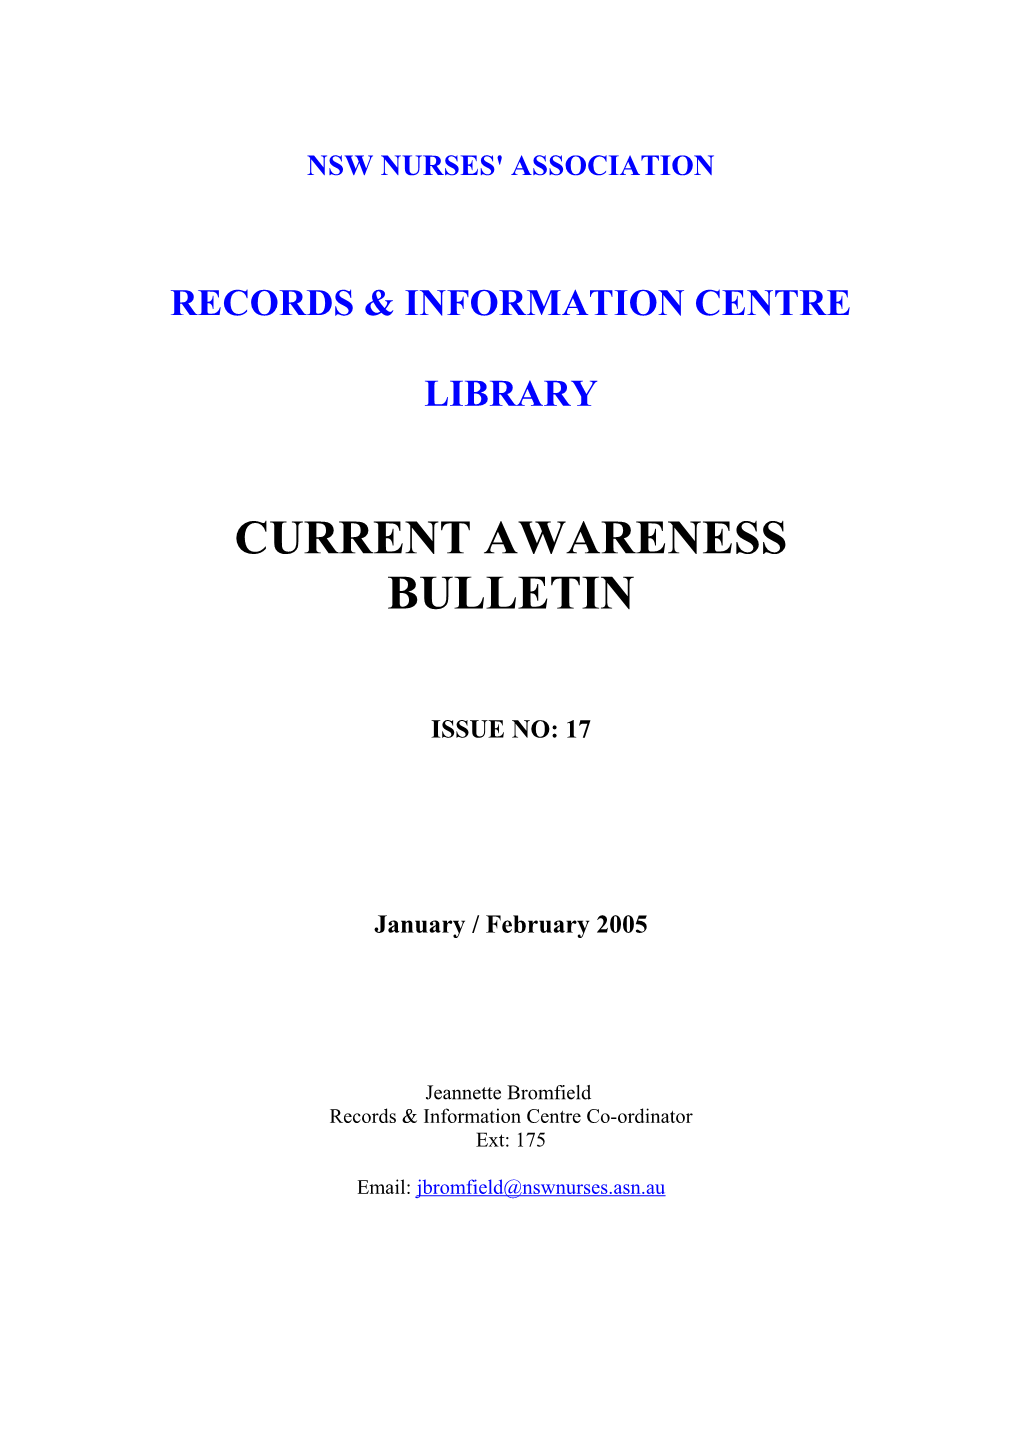 Records & Information Centre